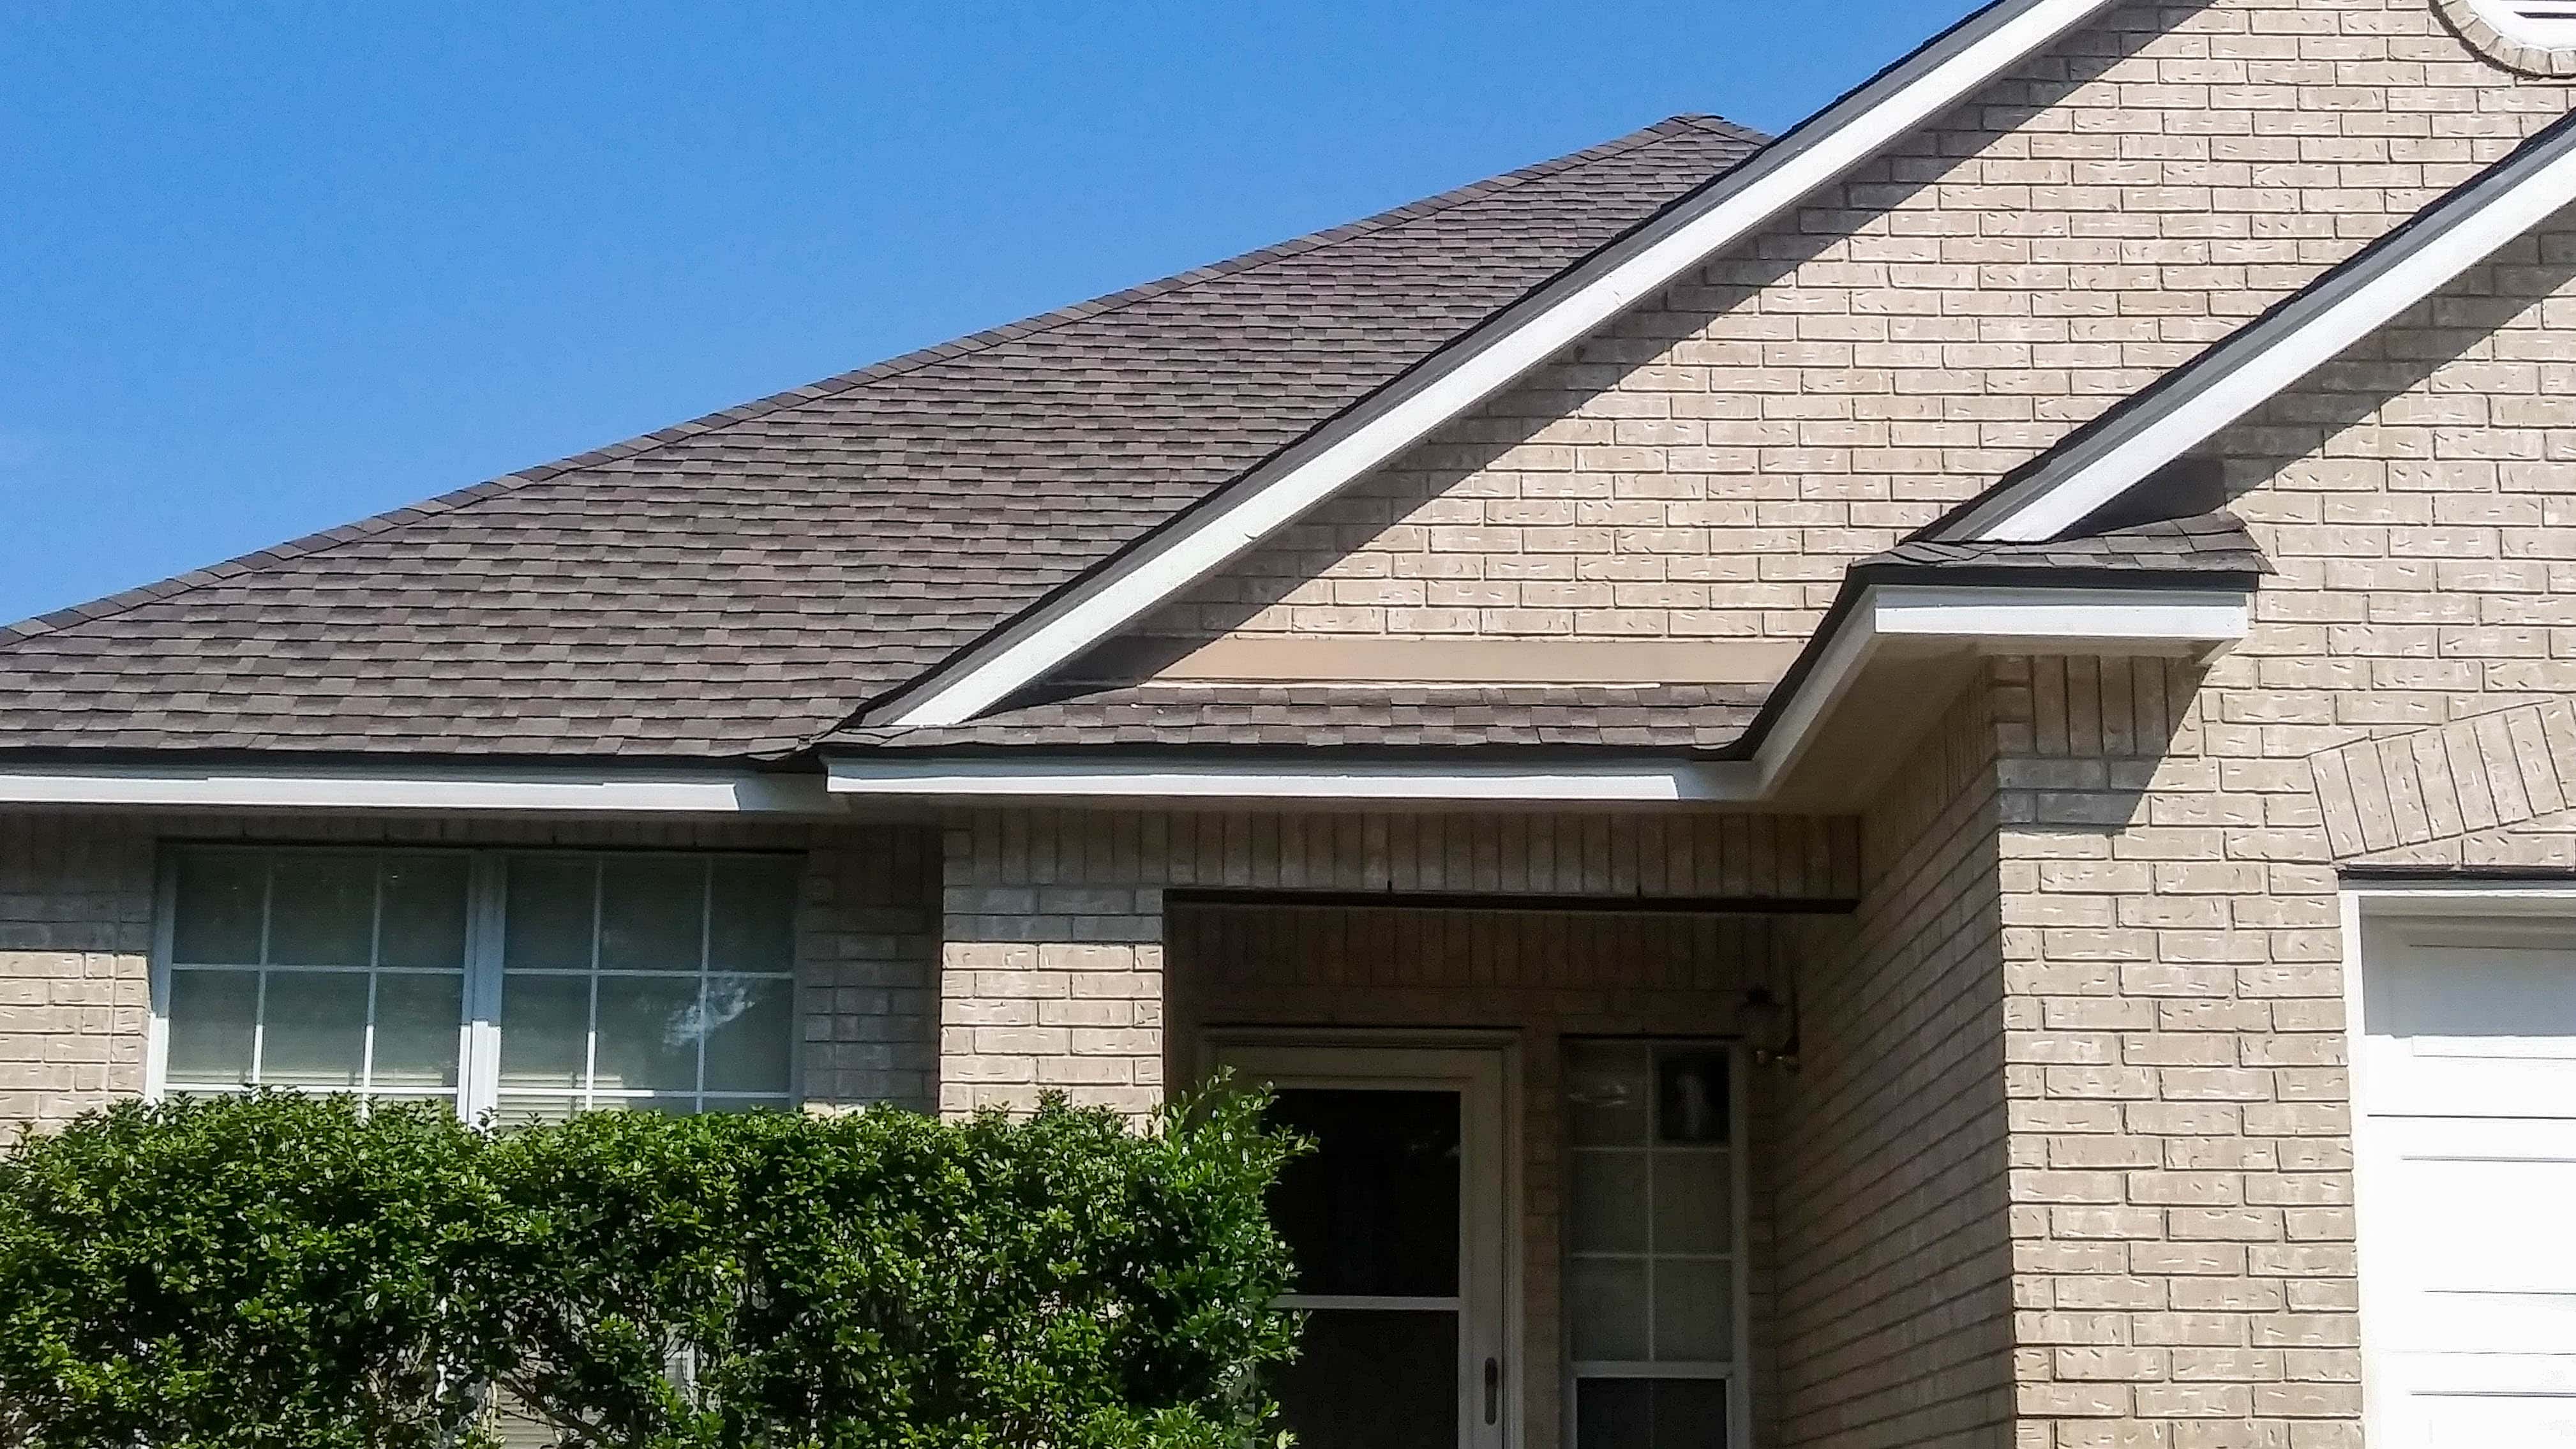 Two Brothers Roofing - San Antonio, TX, US, residential roofing companies near me